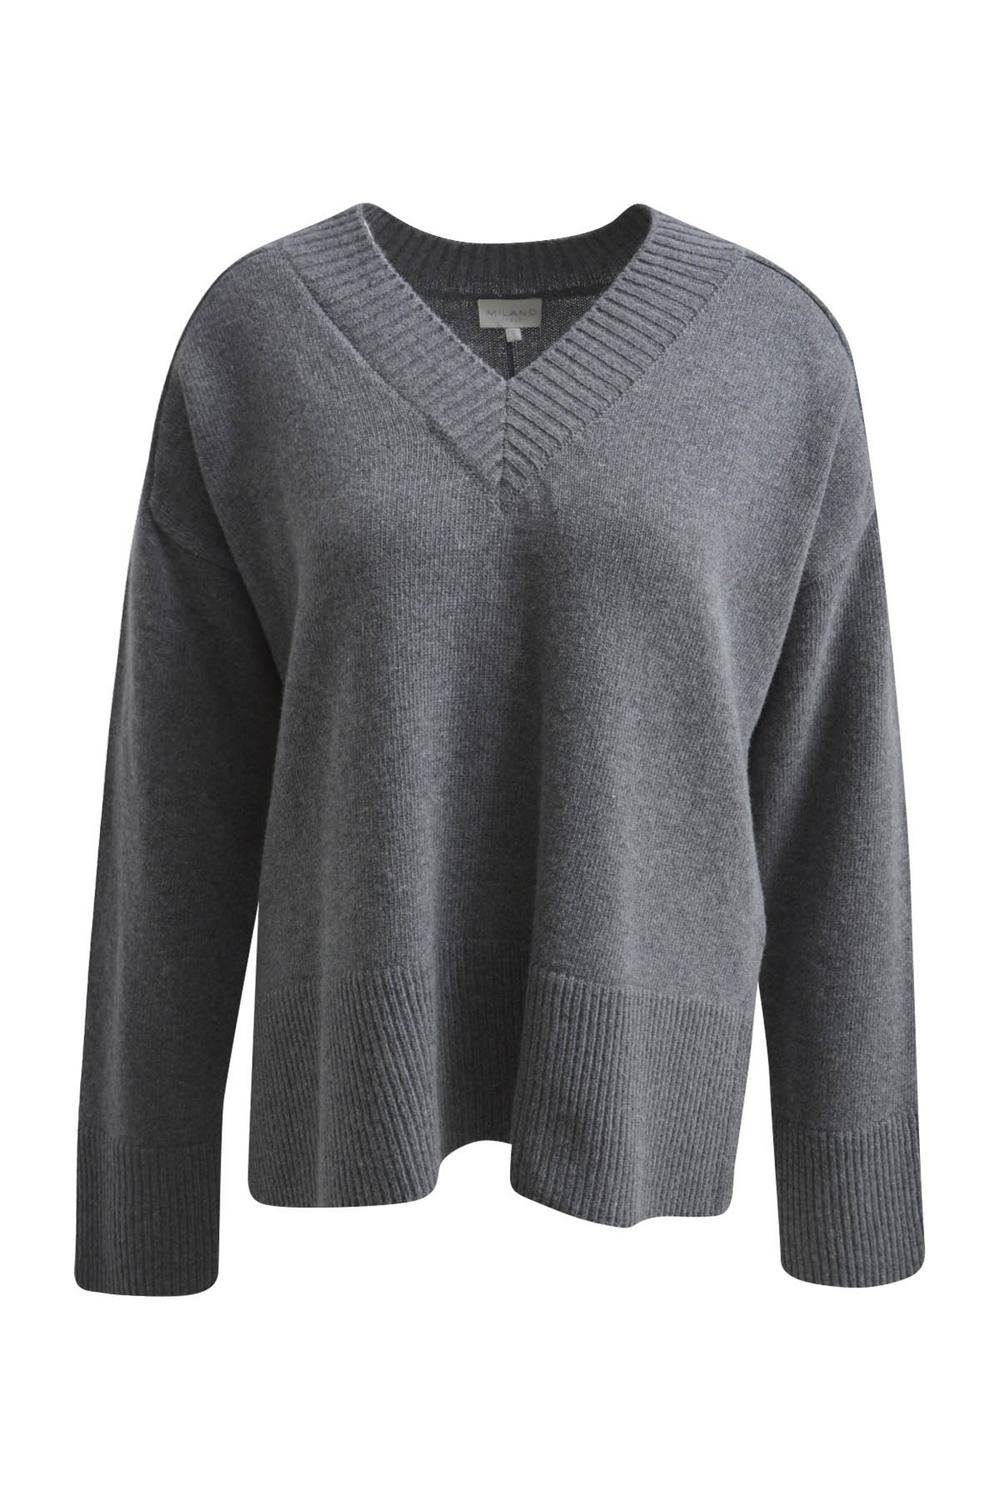 AND WITH 1/1 Milano SLEEVE V-NECK Sweatshirt PULLOVER Italy